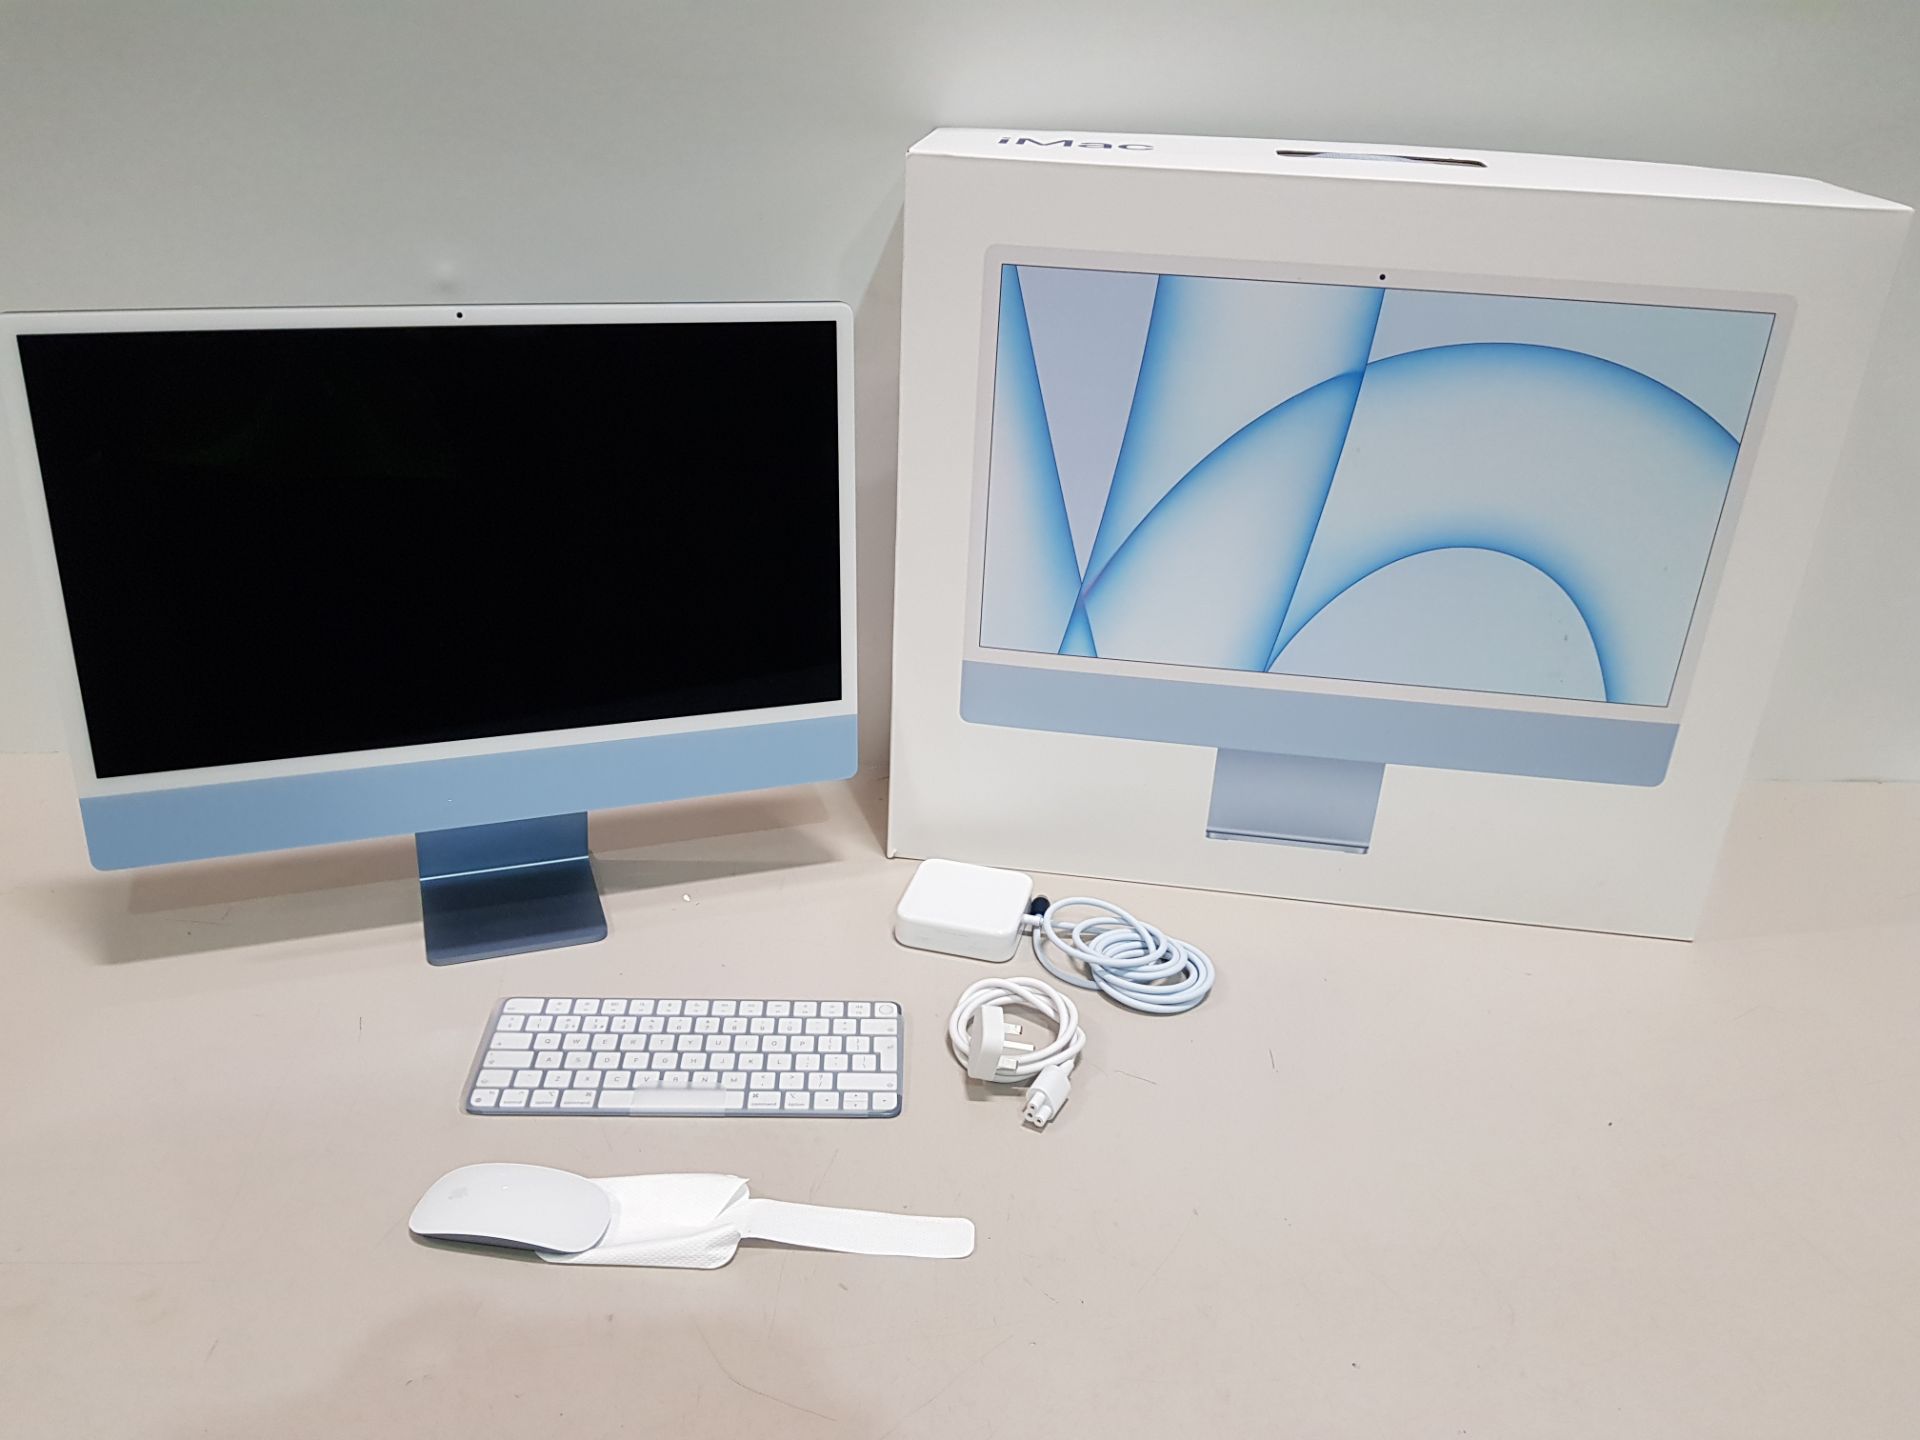 1 X APPLE IMAC 24 INCH ( 2021 ) IN BLUE / WHITE - M1 7 CORE - 8GB RAM - 2 PORTS - INCLUDES POWER